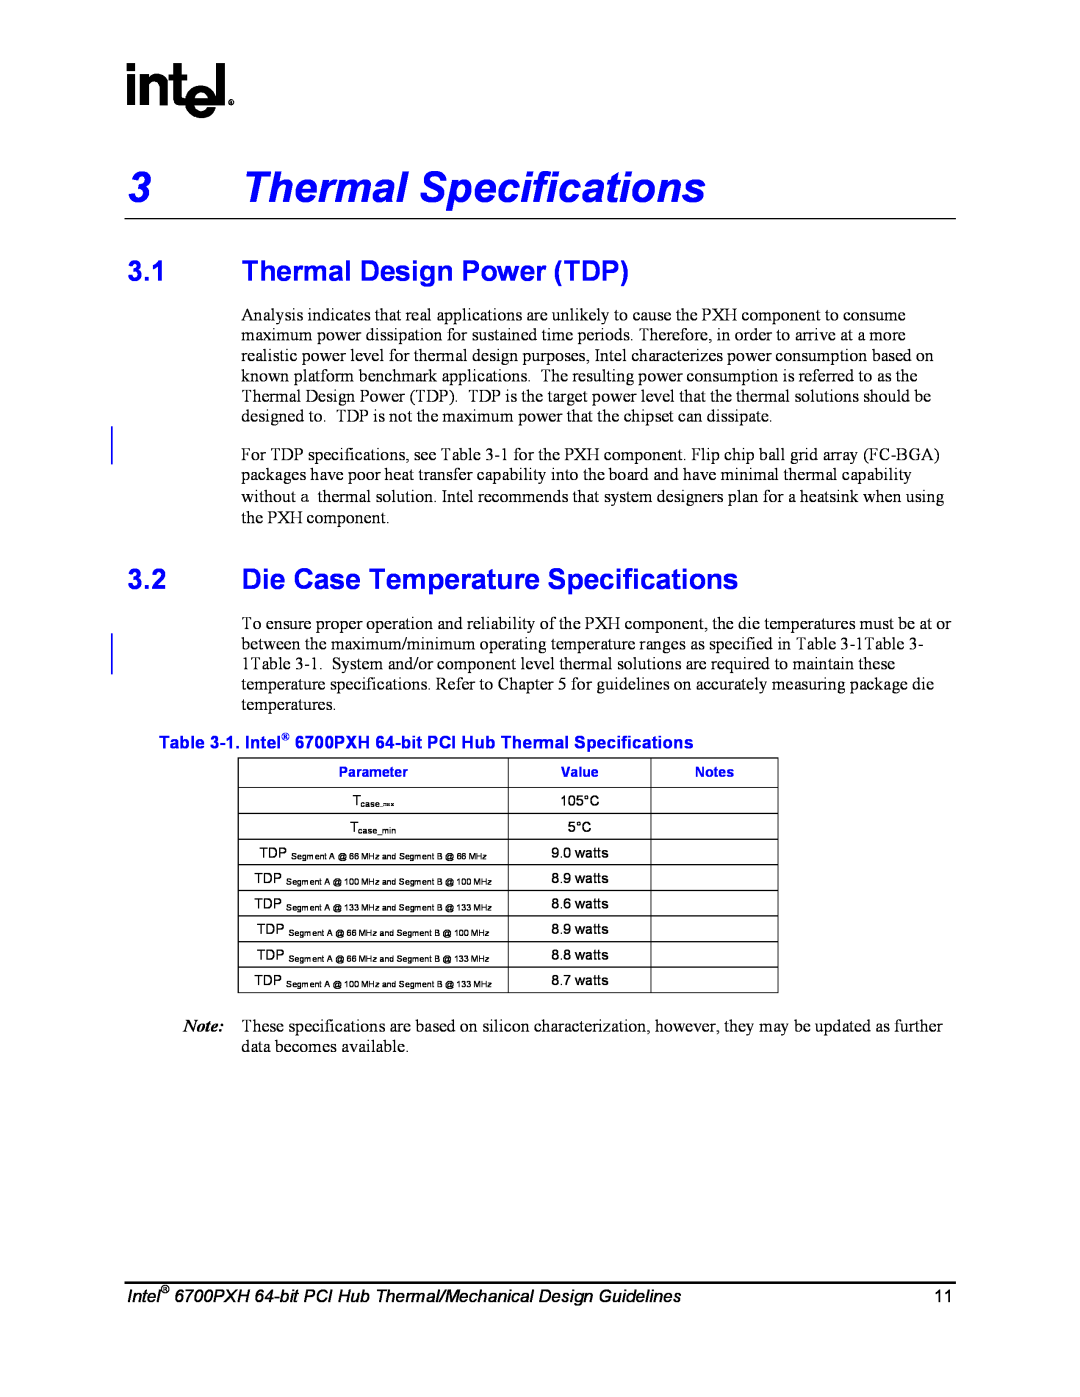 Intel 6700PXH manual Thermal Specifications, Thermal Design Power TDP, Die Case Temperature Specifications 